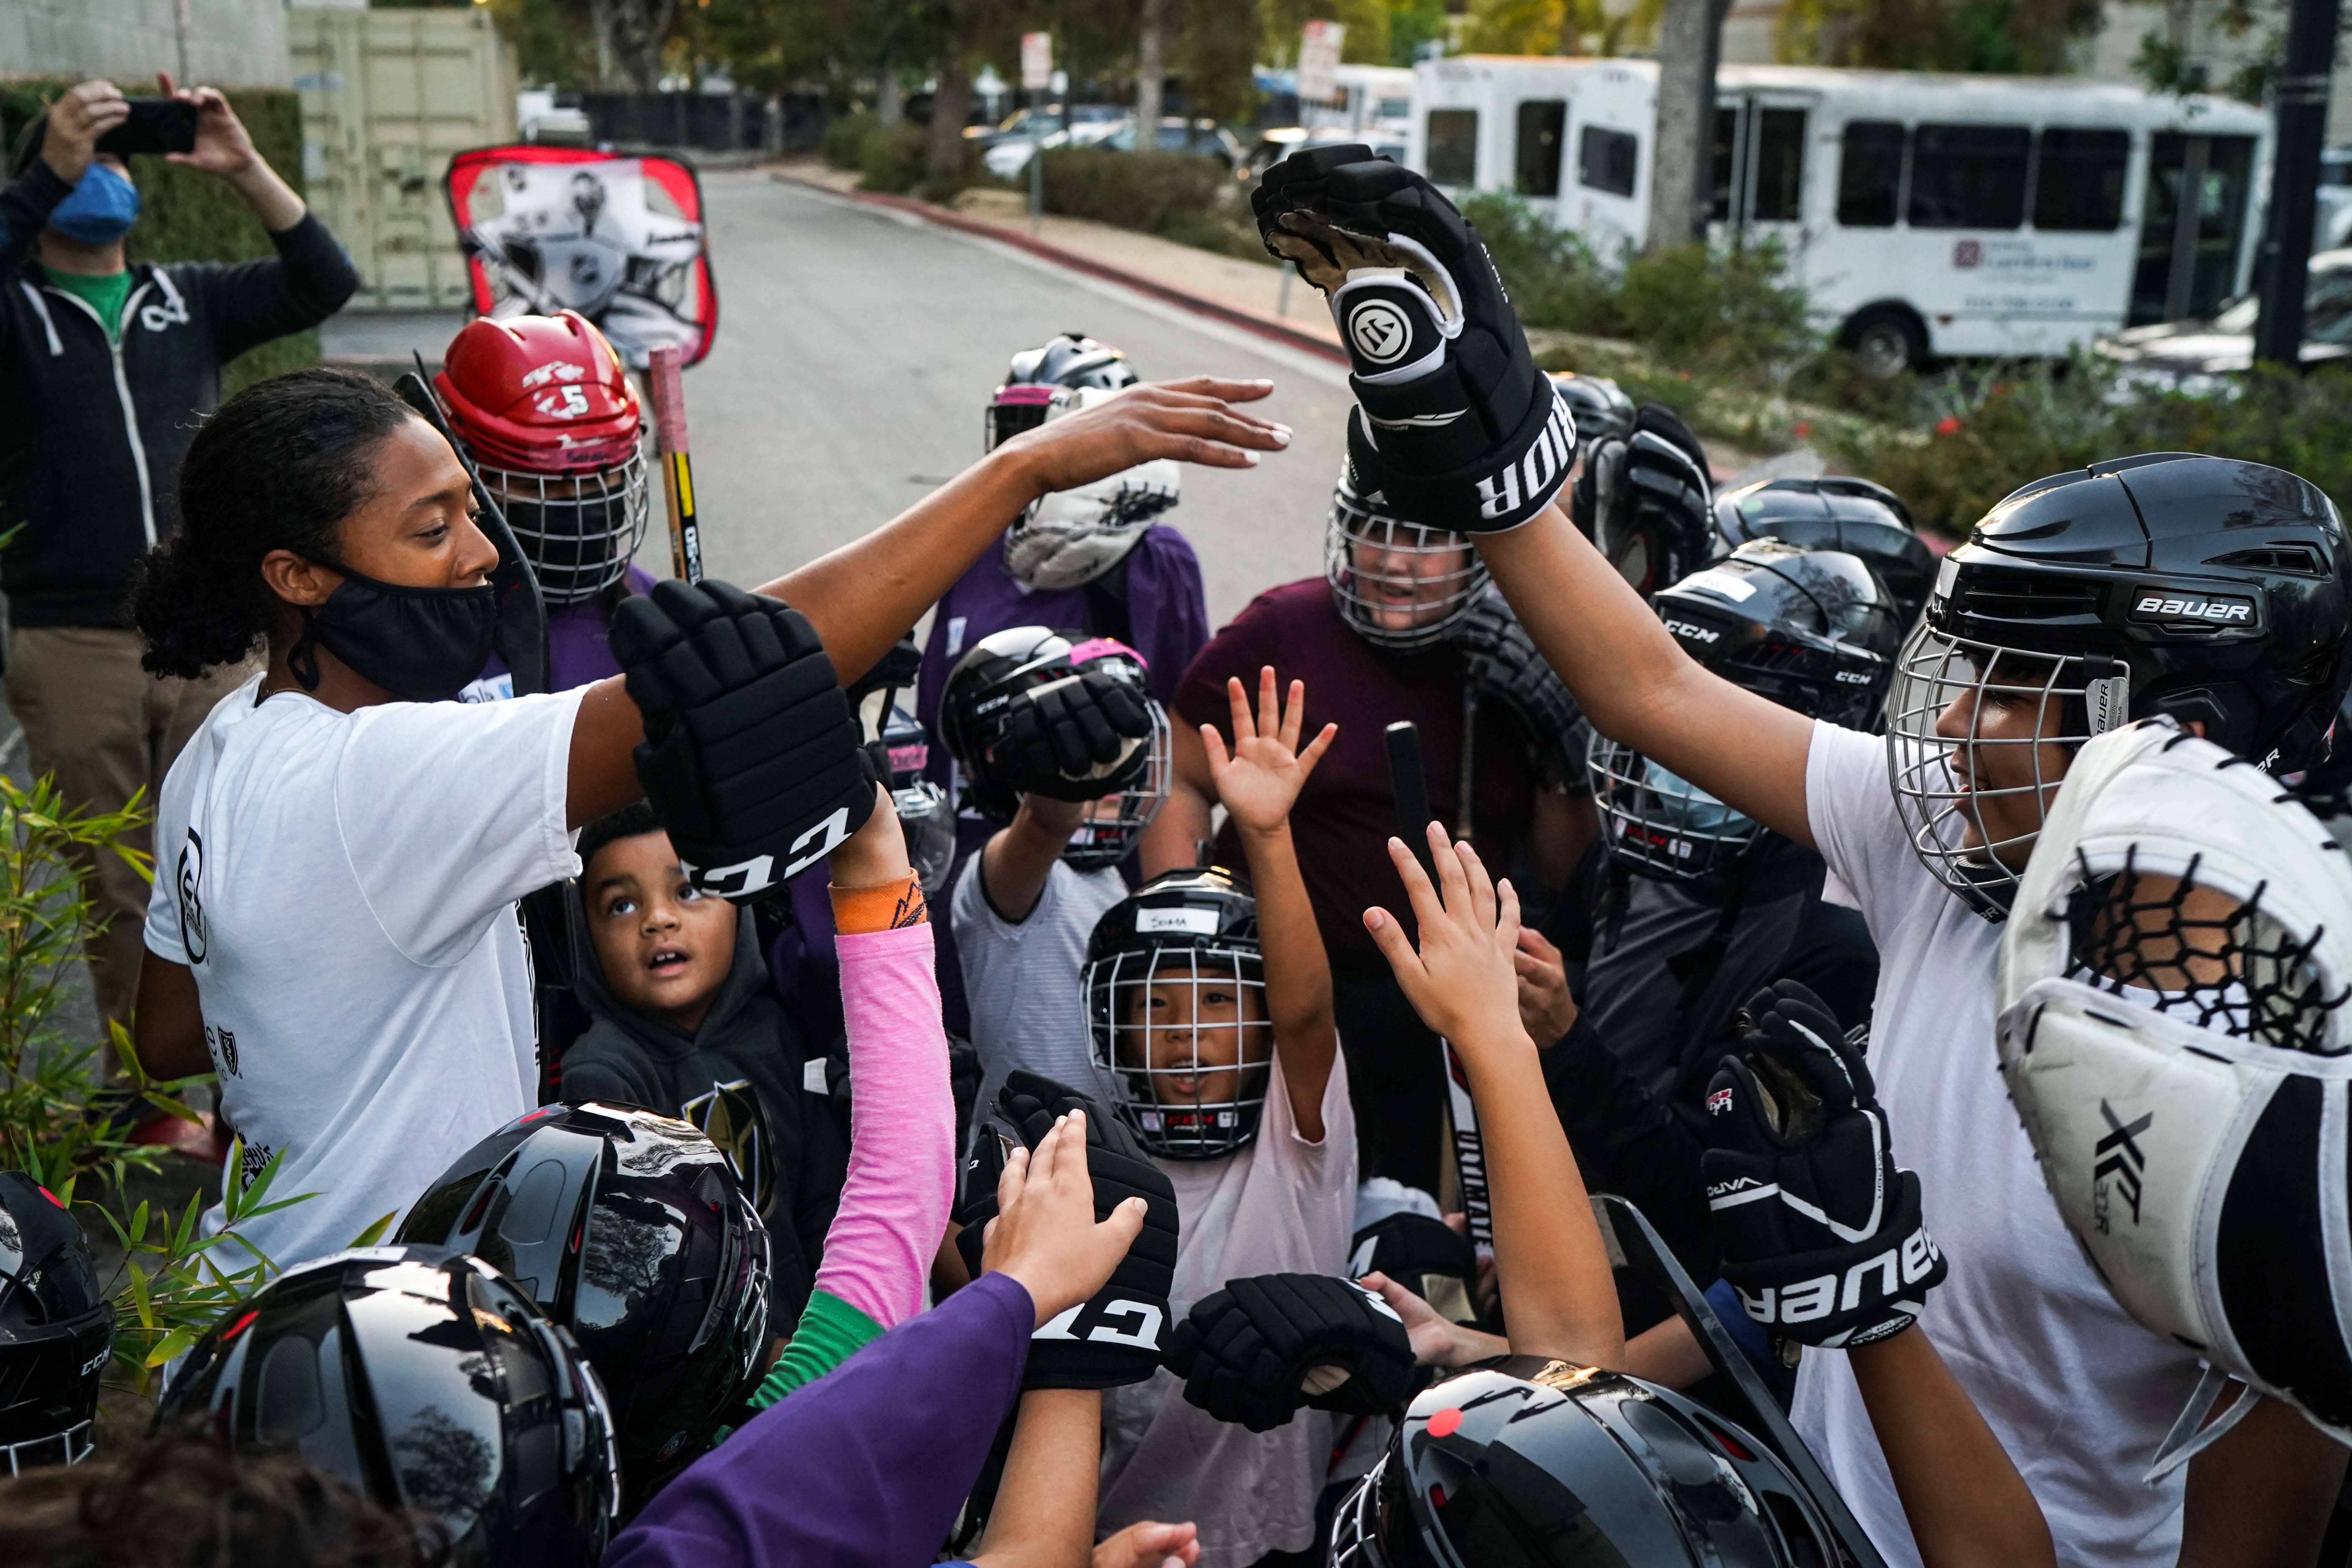 LA Kings pro scout Blake Bolden (left) brings it in with a group of kids after ball hockey practice. 